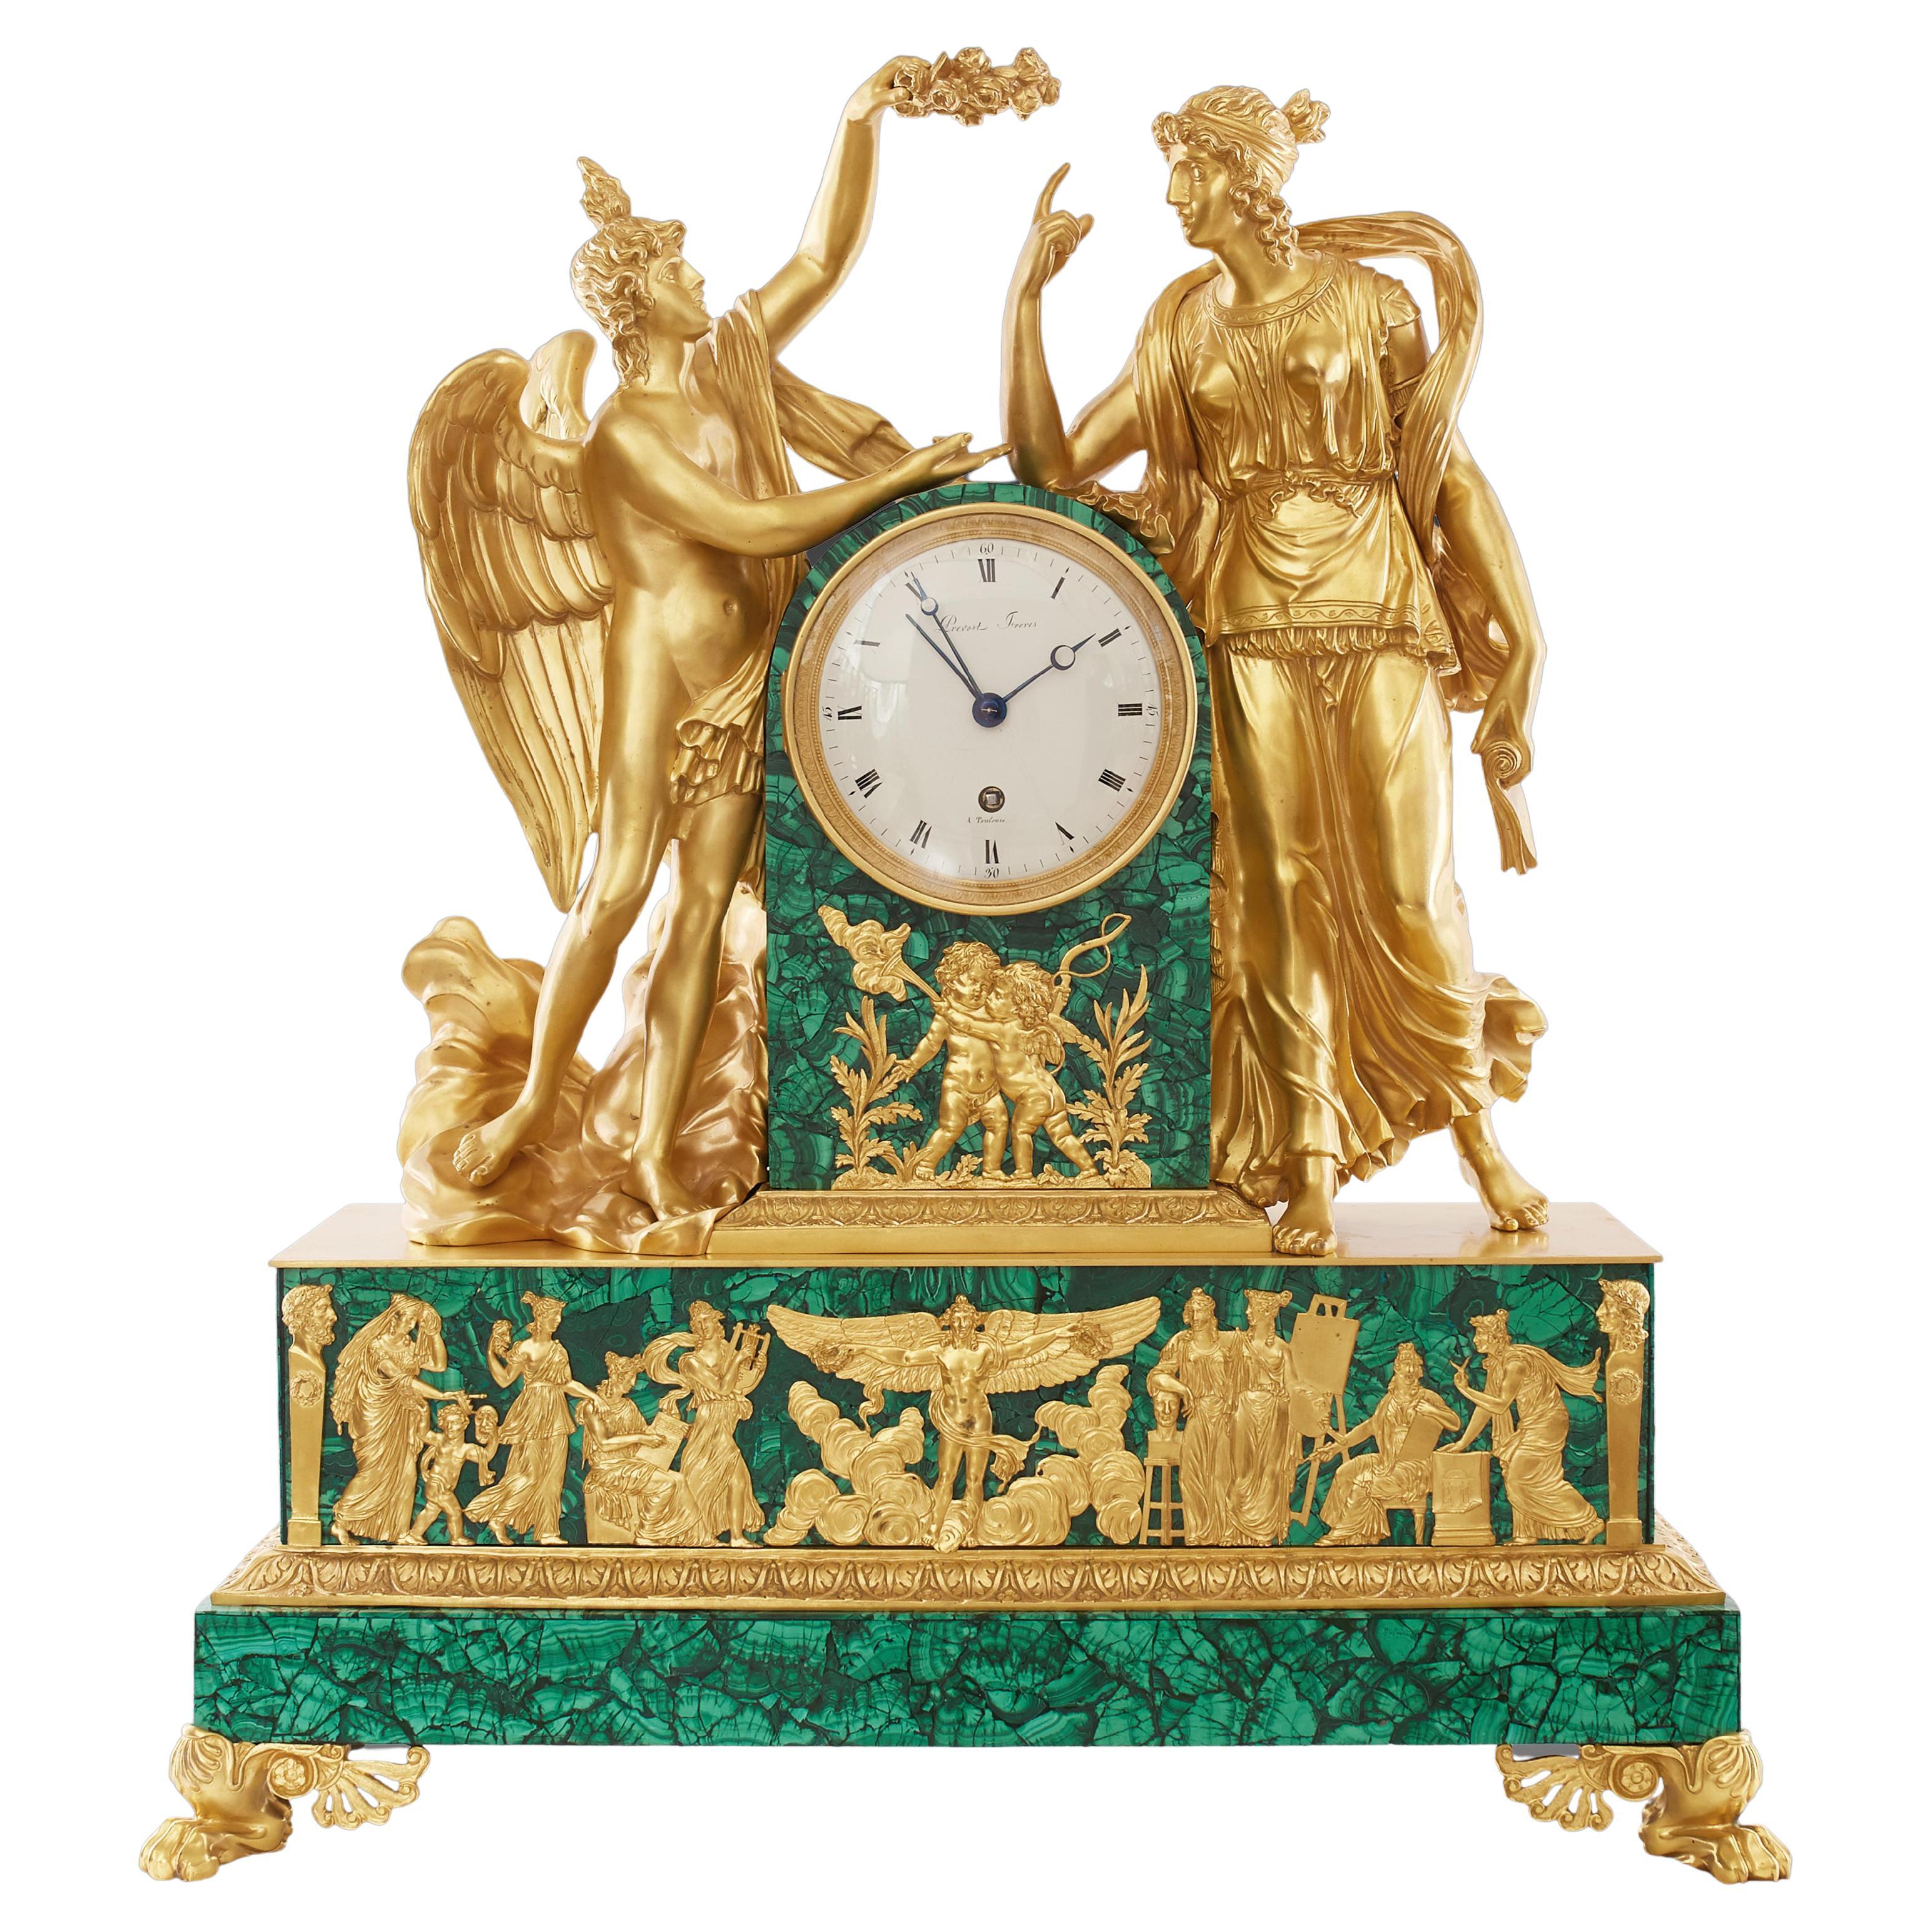 Mantel Clock 19th Century Louis Philippe Charles X by Prevost Freres a Toulose